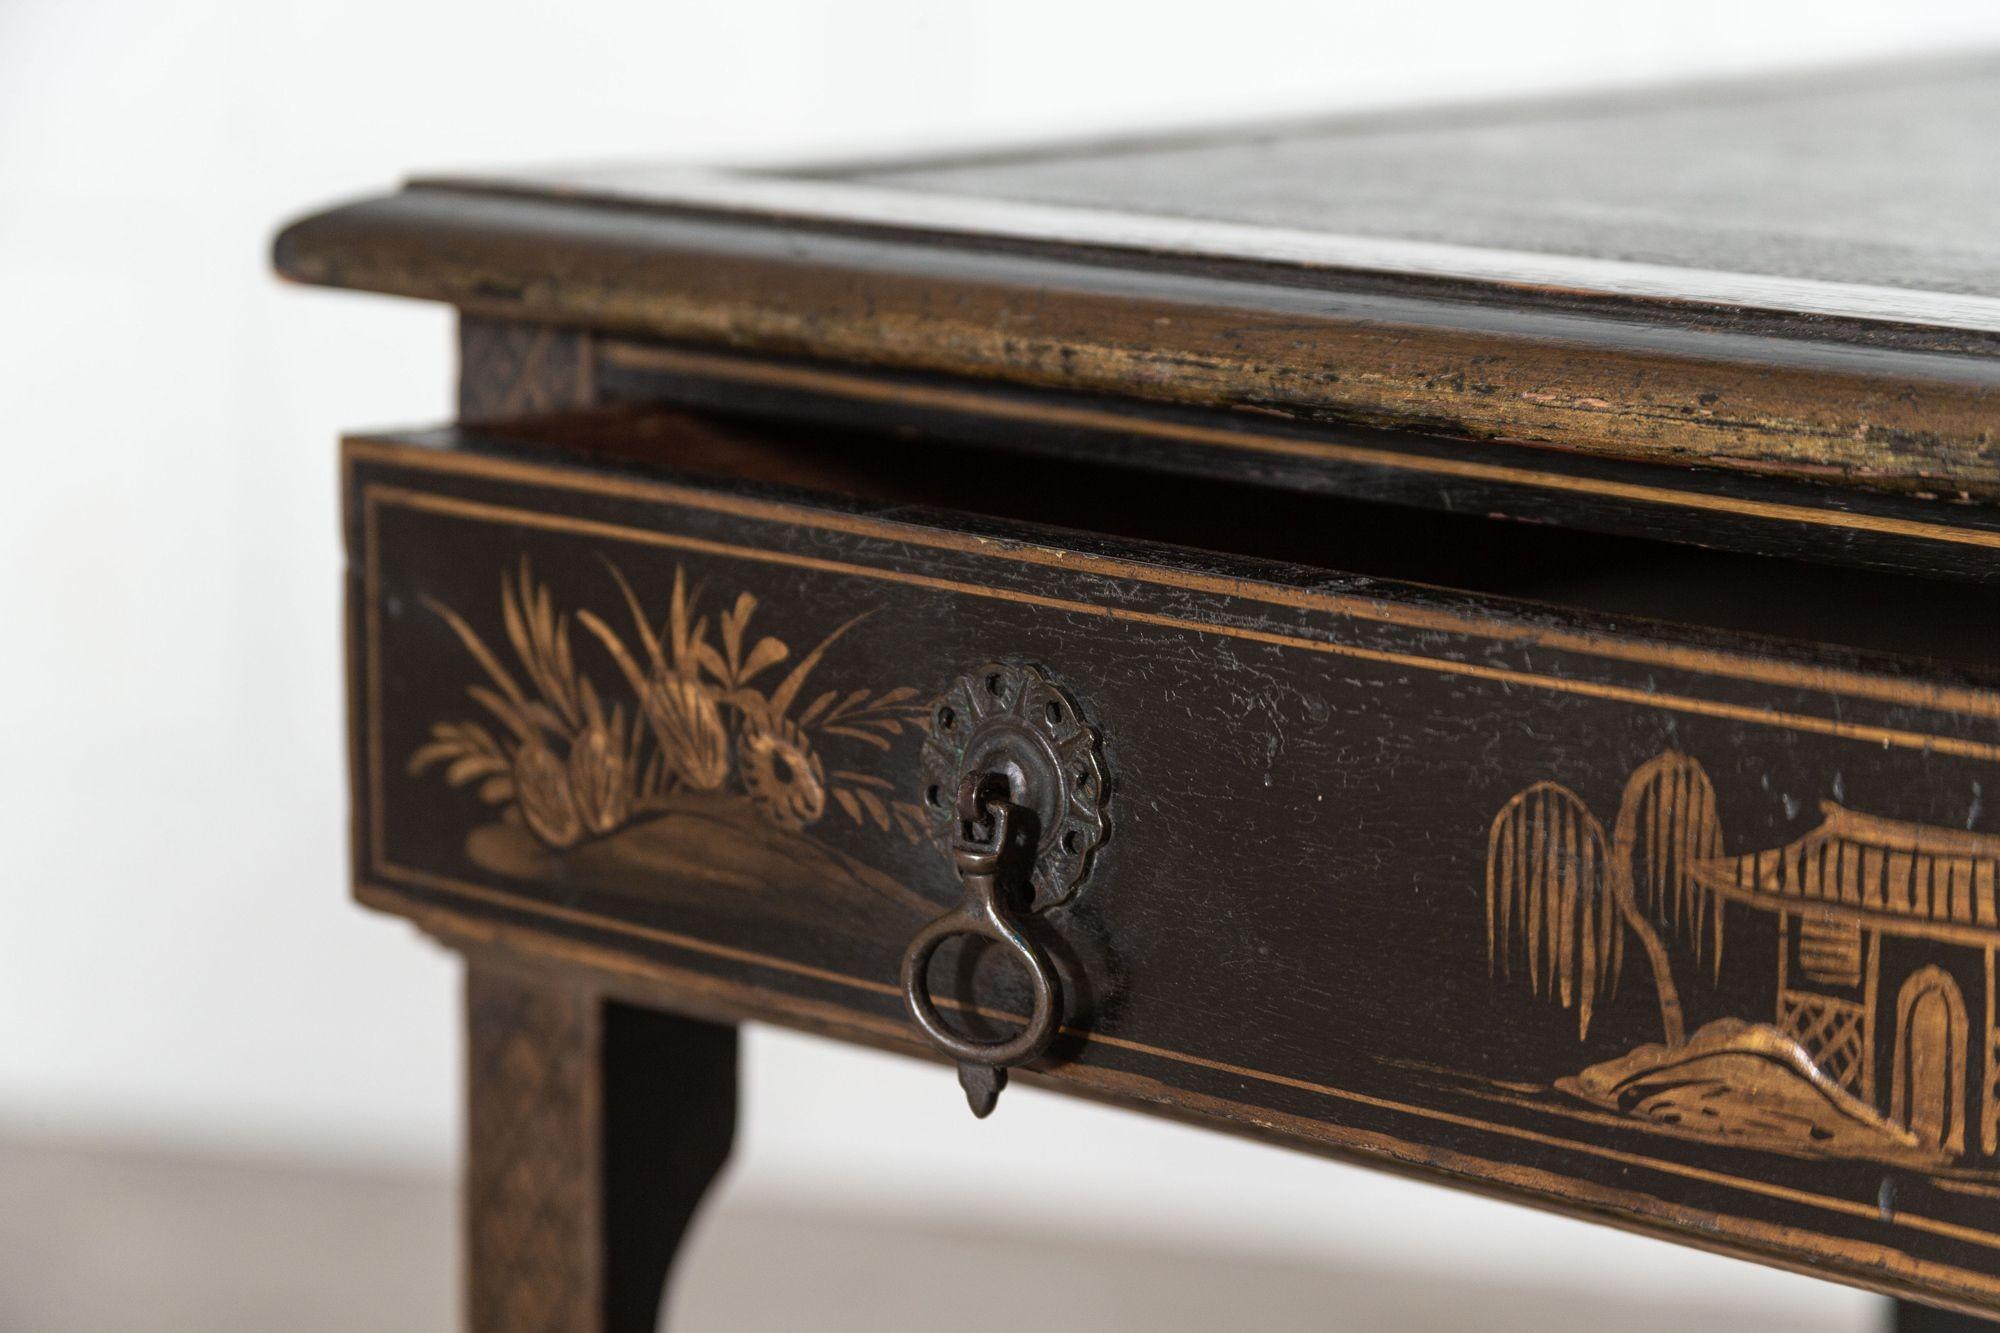 circa 1840
19th century English Chinoiserie Lleather writing table.
An exceptional example.
sku 1393
Measures:W 76 x D 51 x H 74 cm.